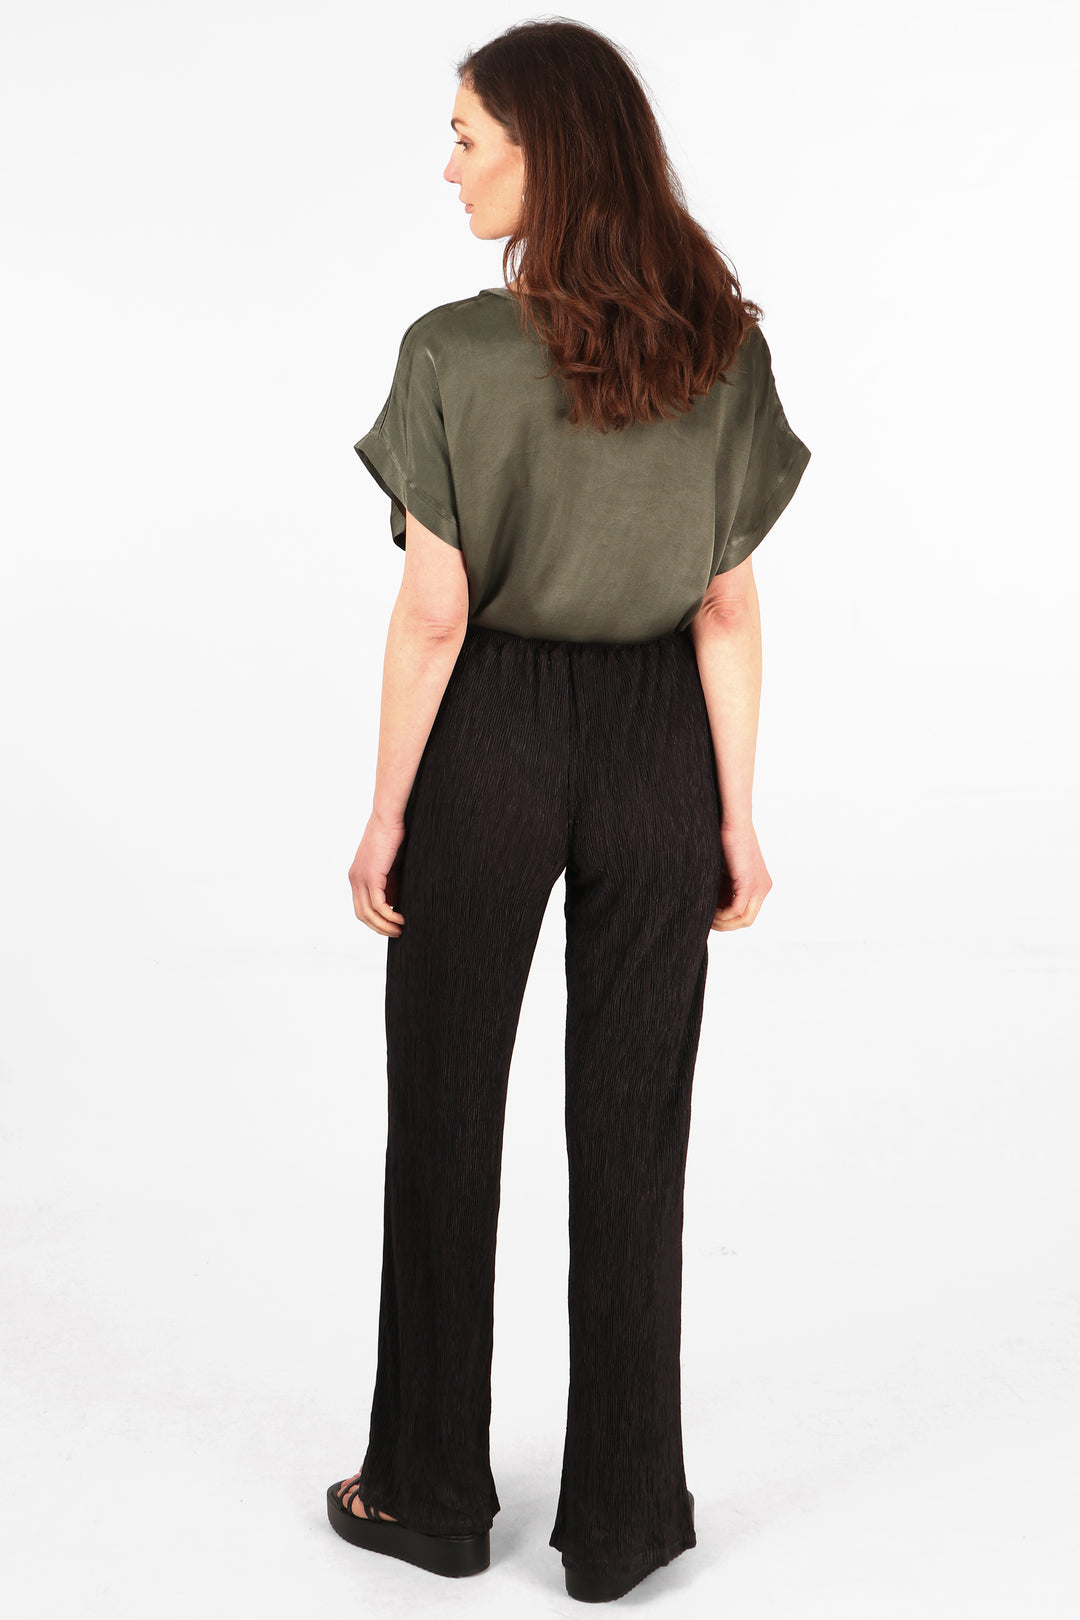 model showing the back of the black plisse trousers, showing an all over plisse fabric